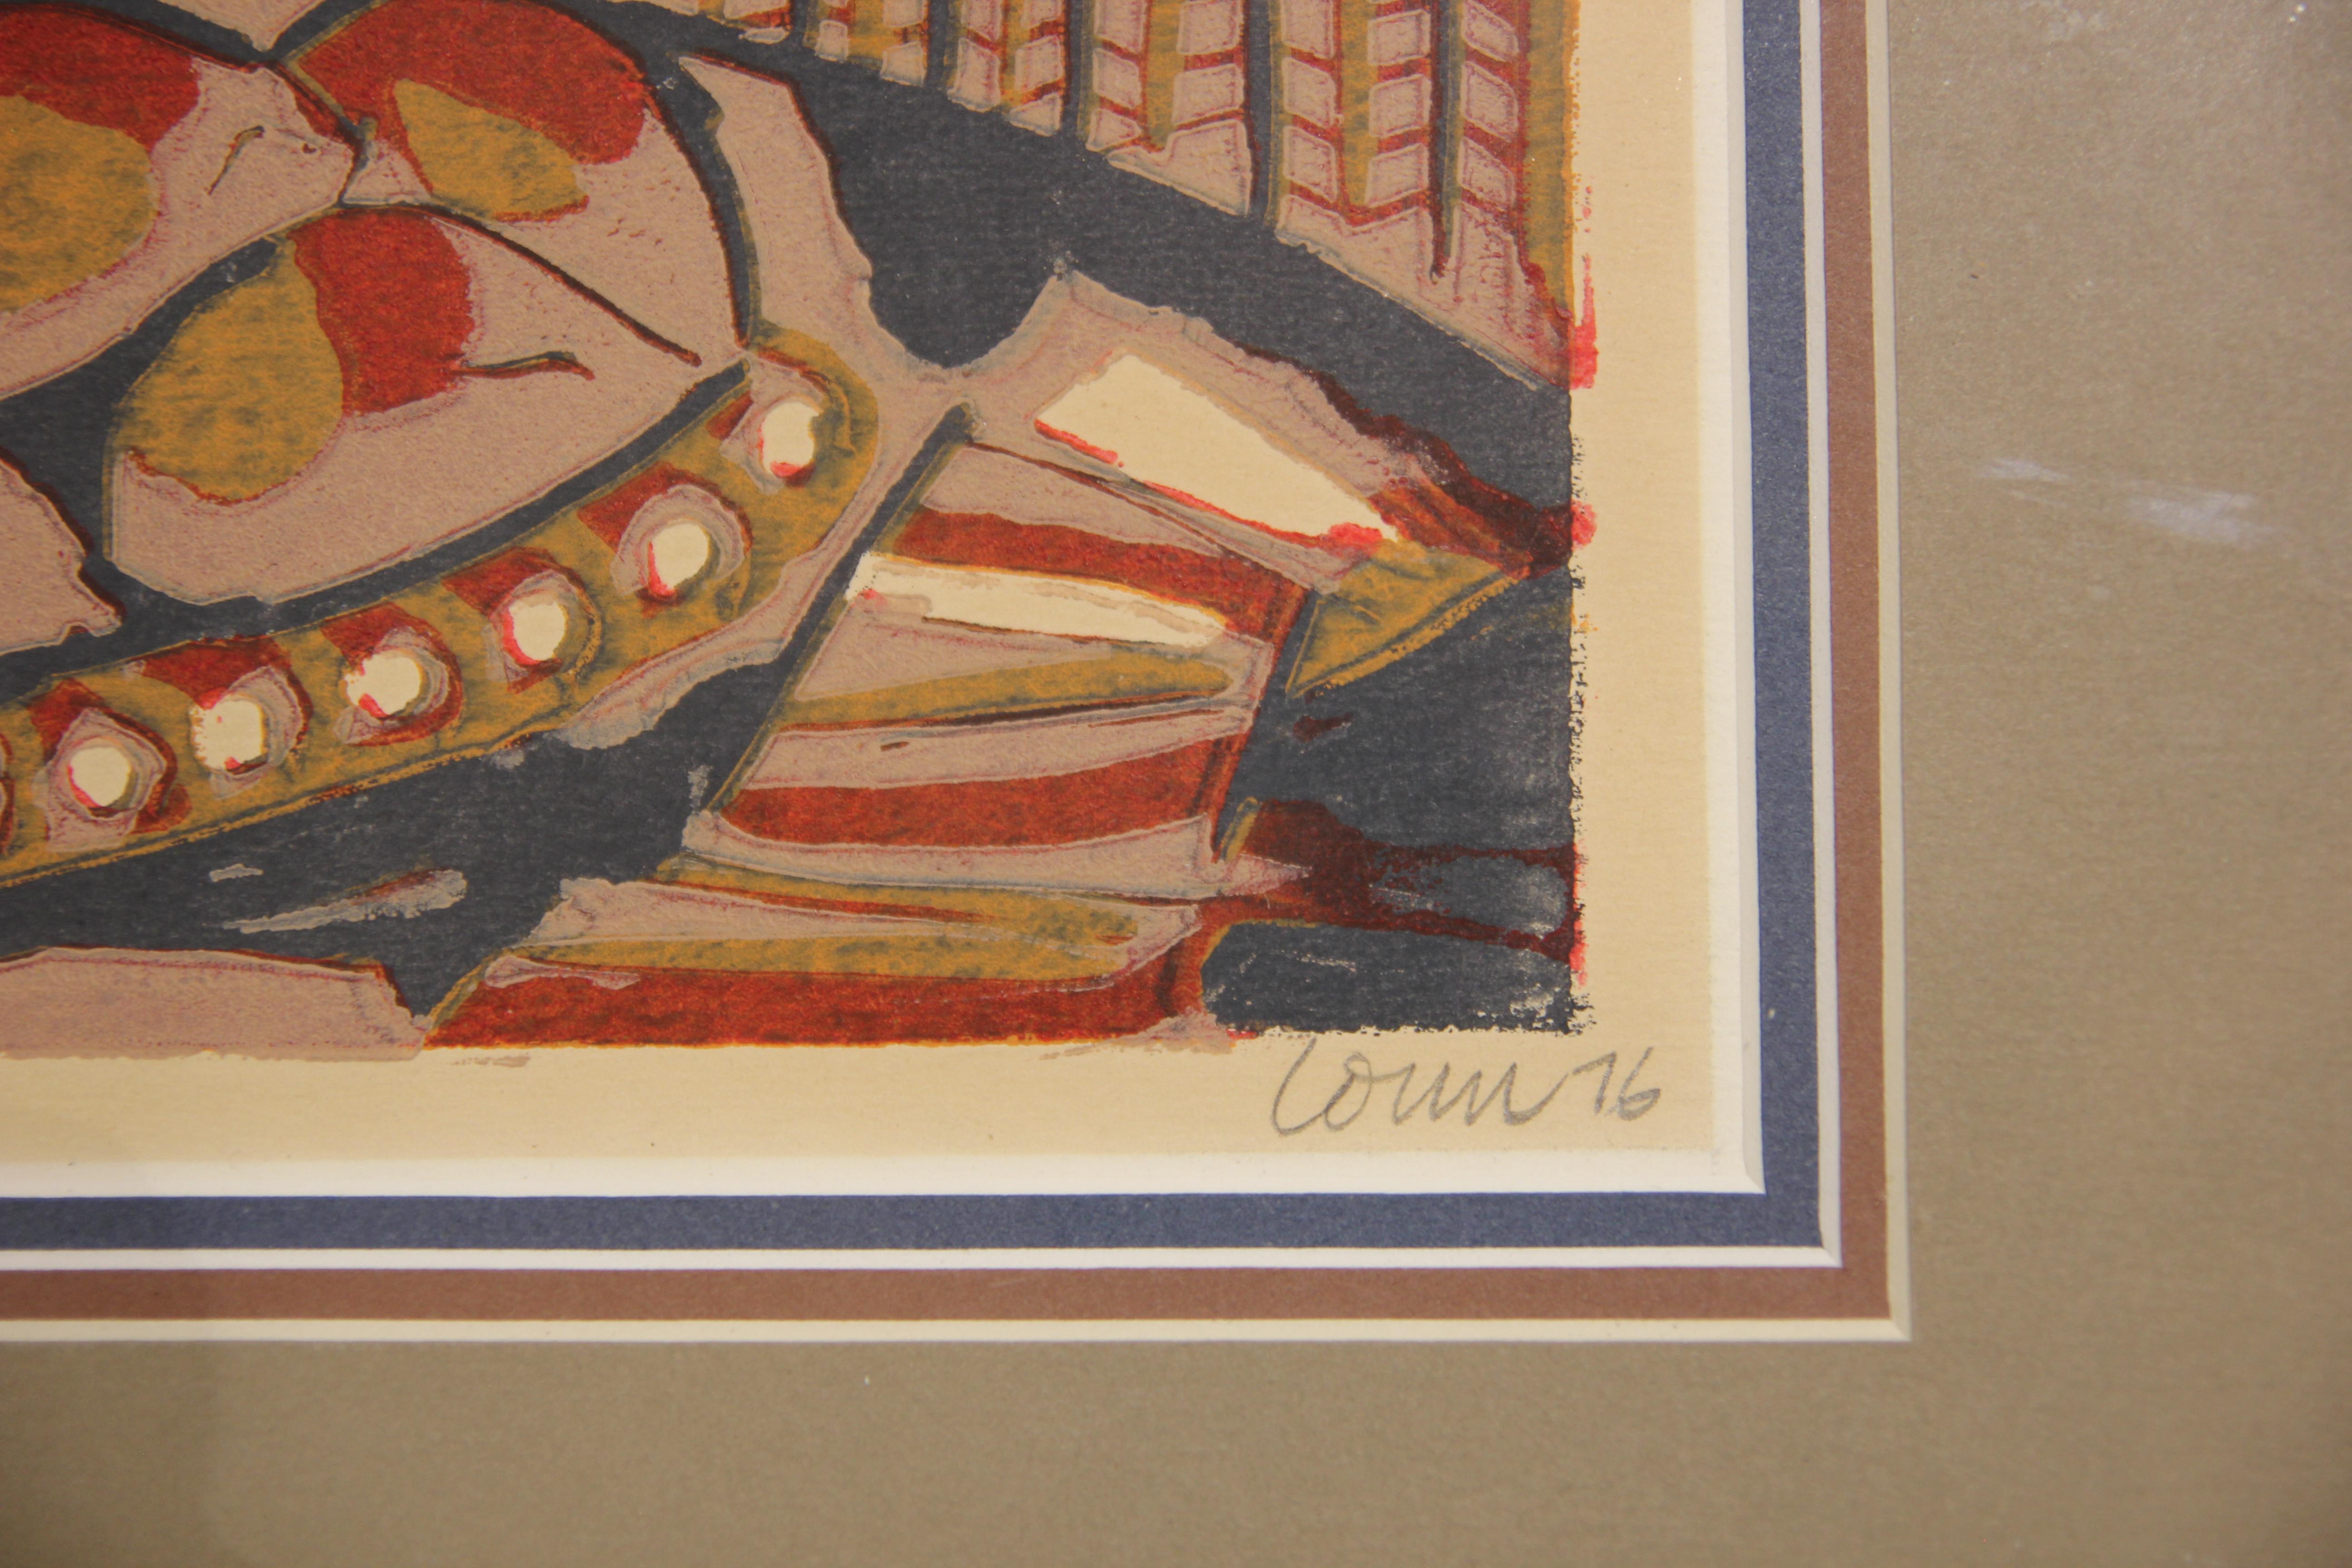 Colored woodblock print by San Antonio, Texas artist Richard Conn. Red, blue, yellow, and white print depicting a still life of pastries within a patterned interior space. Signed, titled, dated, and editioned along lower margin. Edition 4/10. Triple